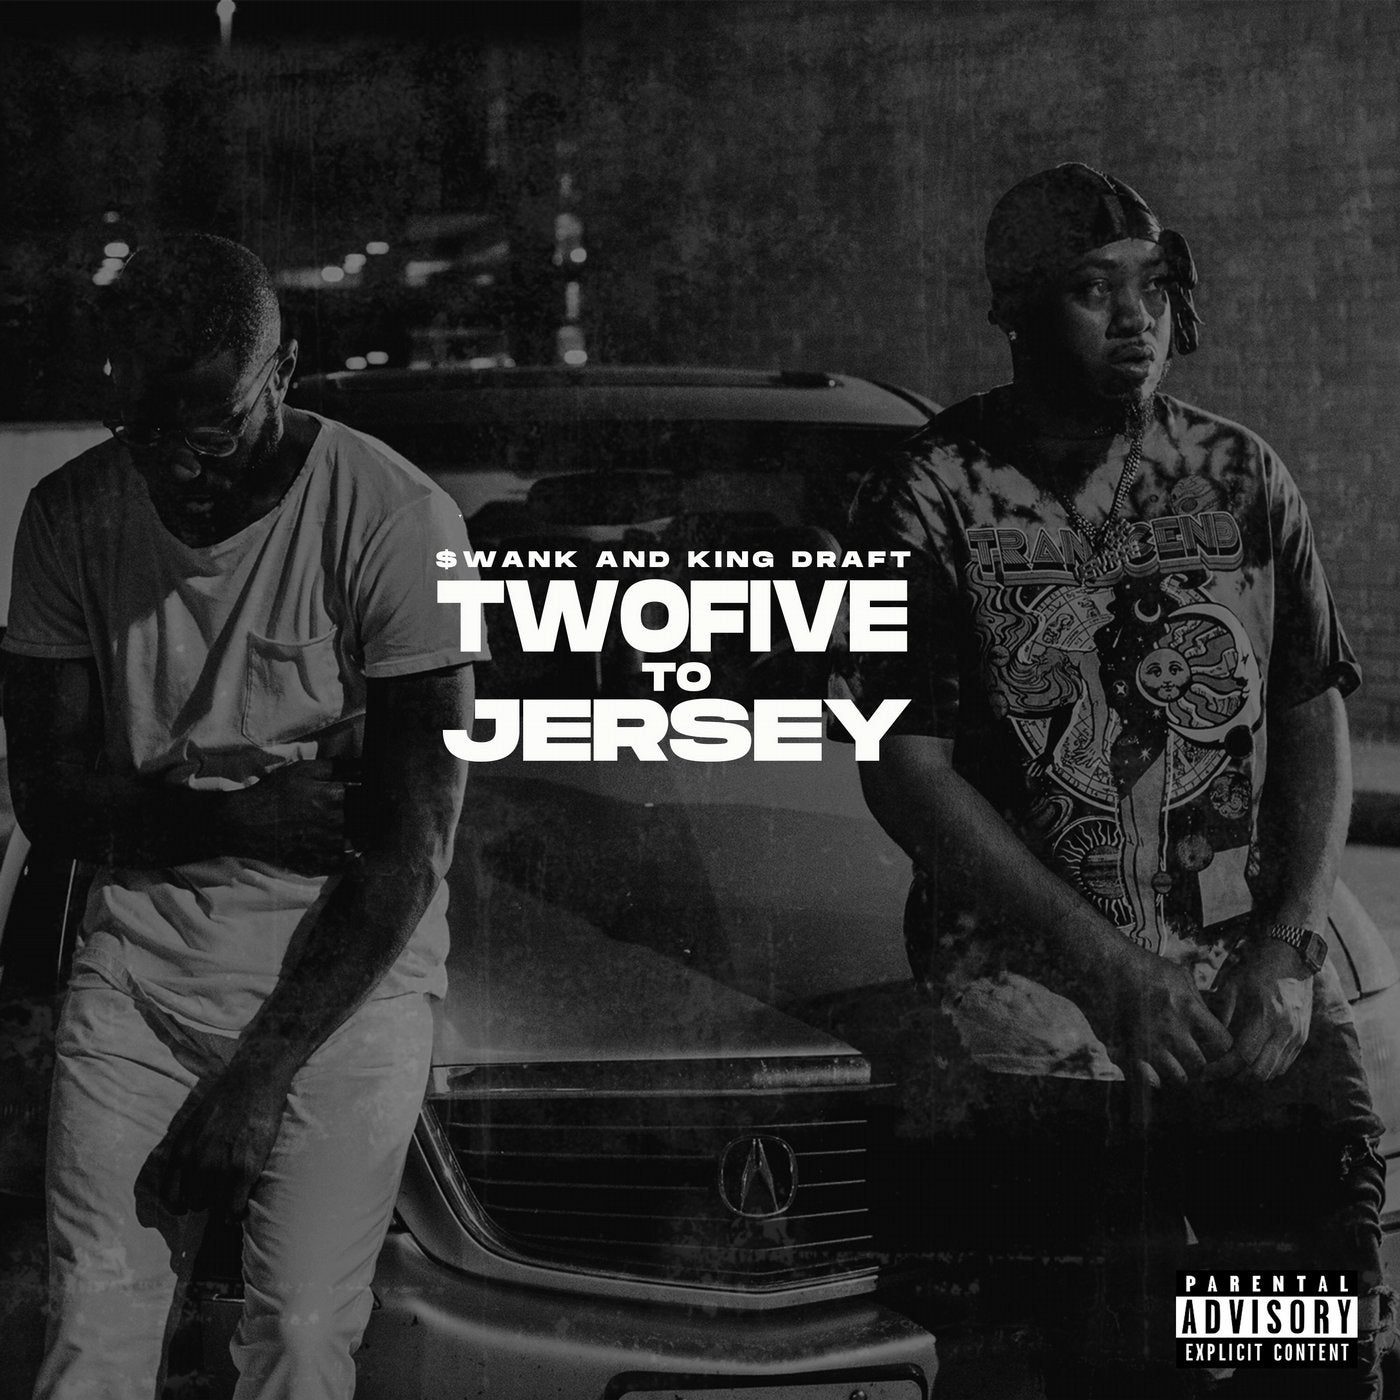 TwoFive to Jersey